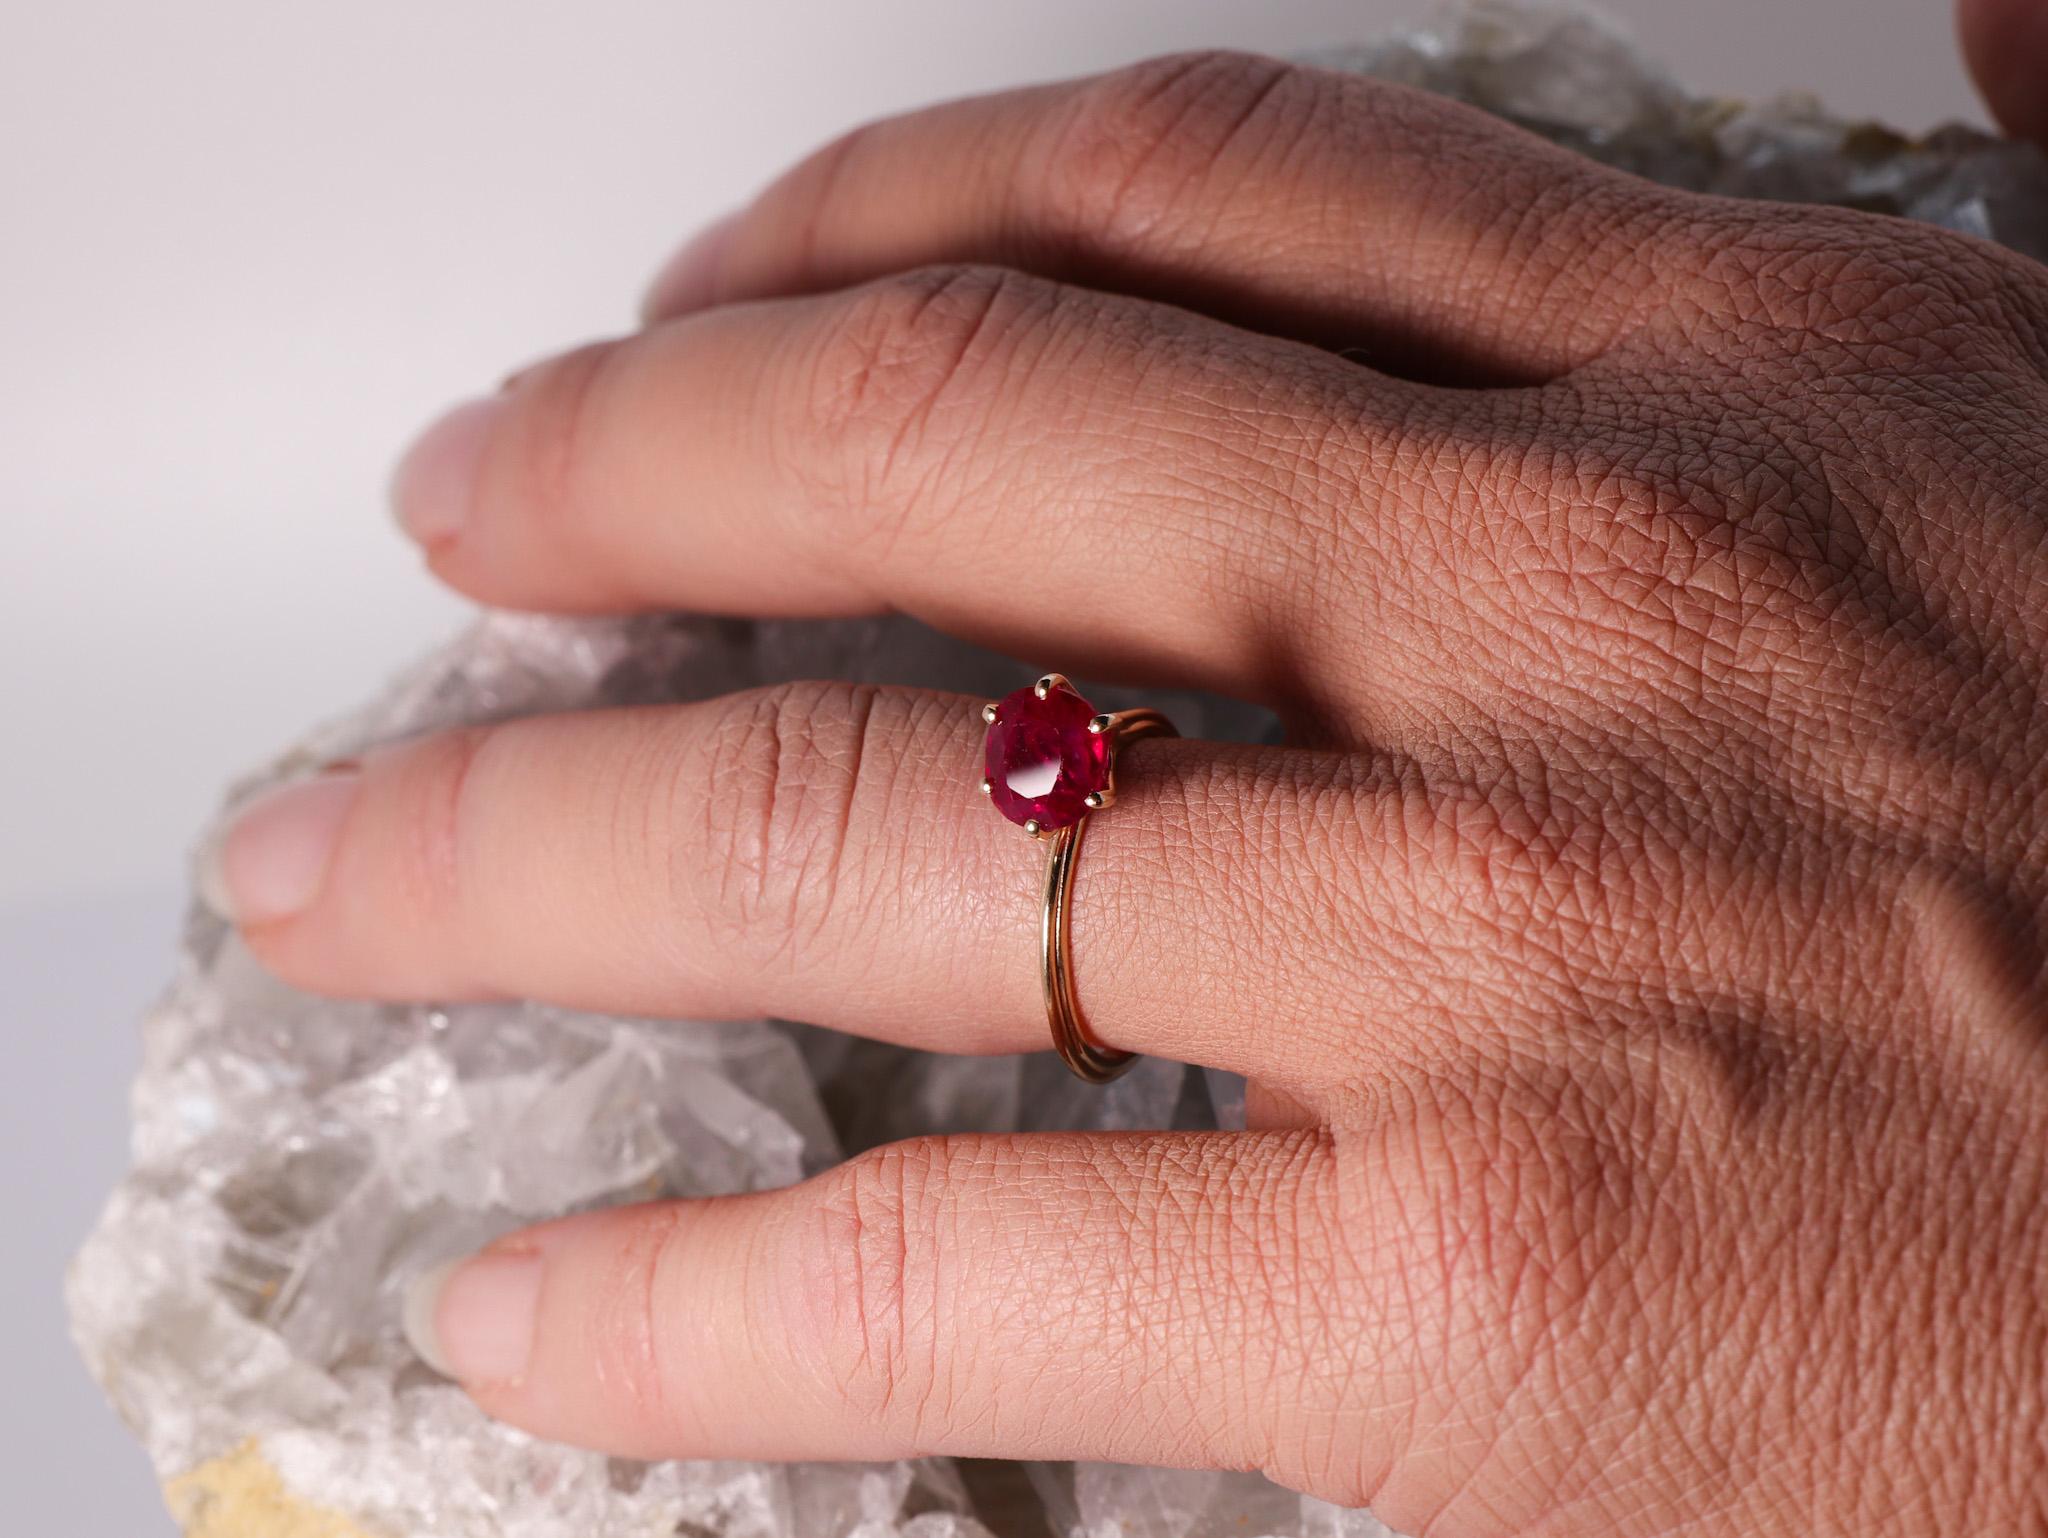 2.32 cts Burma Ruby 18k Rose Gold Stackable Asymmetrical Cosmic Design Ring.
The Egle ring is made of 18 karat rose gold and features a cushion mixed cut heated Burma ruby around 2.32 carats, which measures 7.5 mm by 6.7 mm. I personally bought this